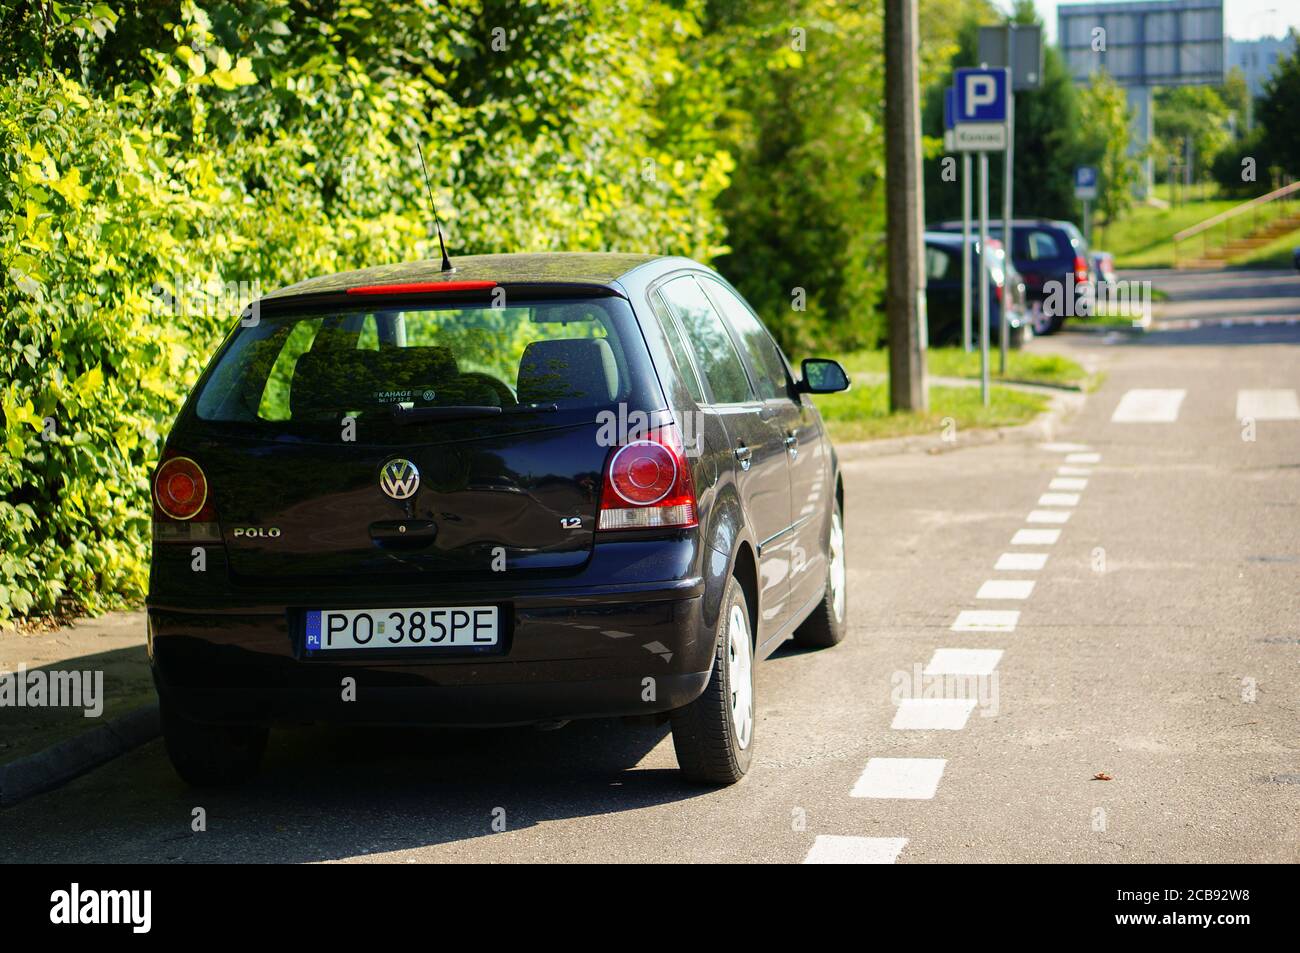 POZNAN, POLAND - Jul 29, 2020: Parked black Volkswagen Polo car on a  parking space next to green bush on a warm sunny day Stock Photo - Alamy